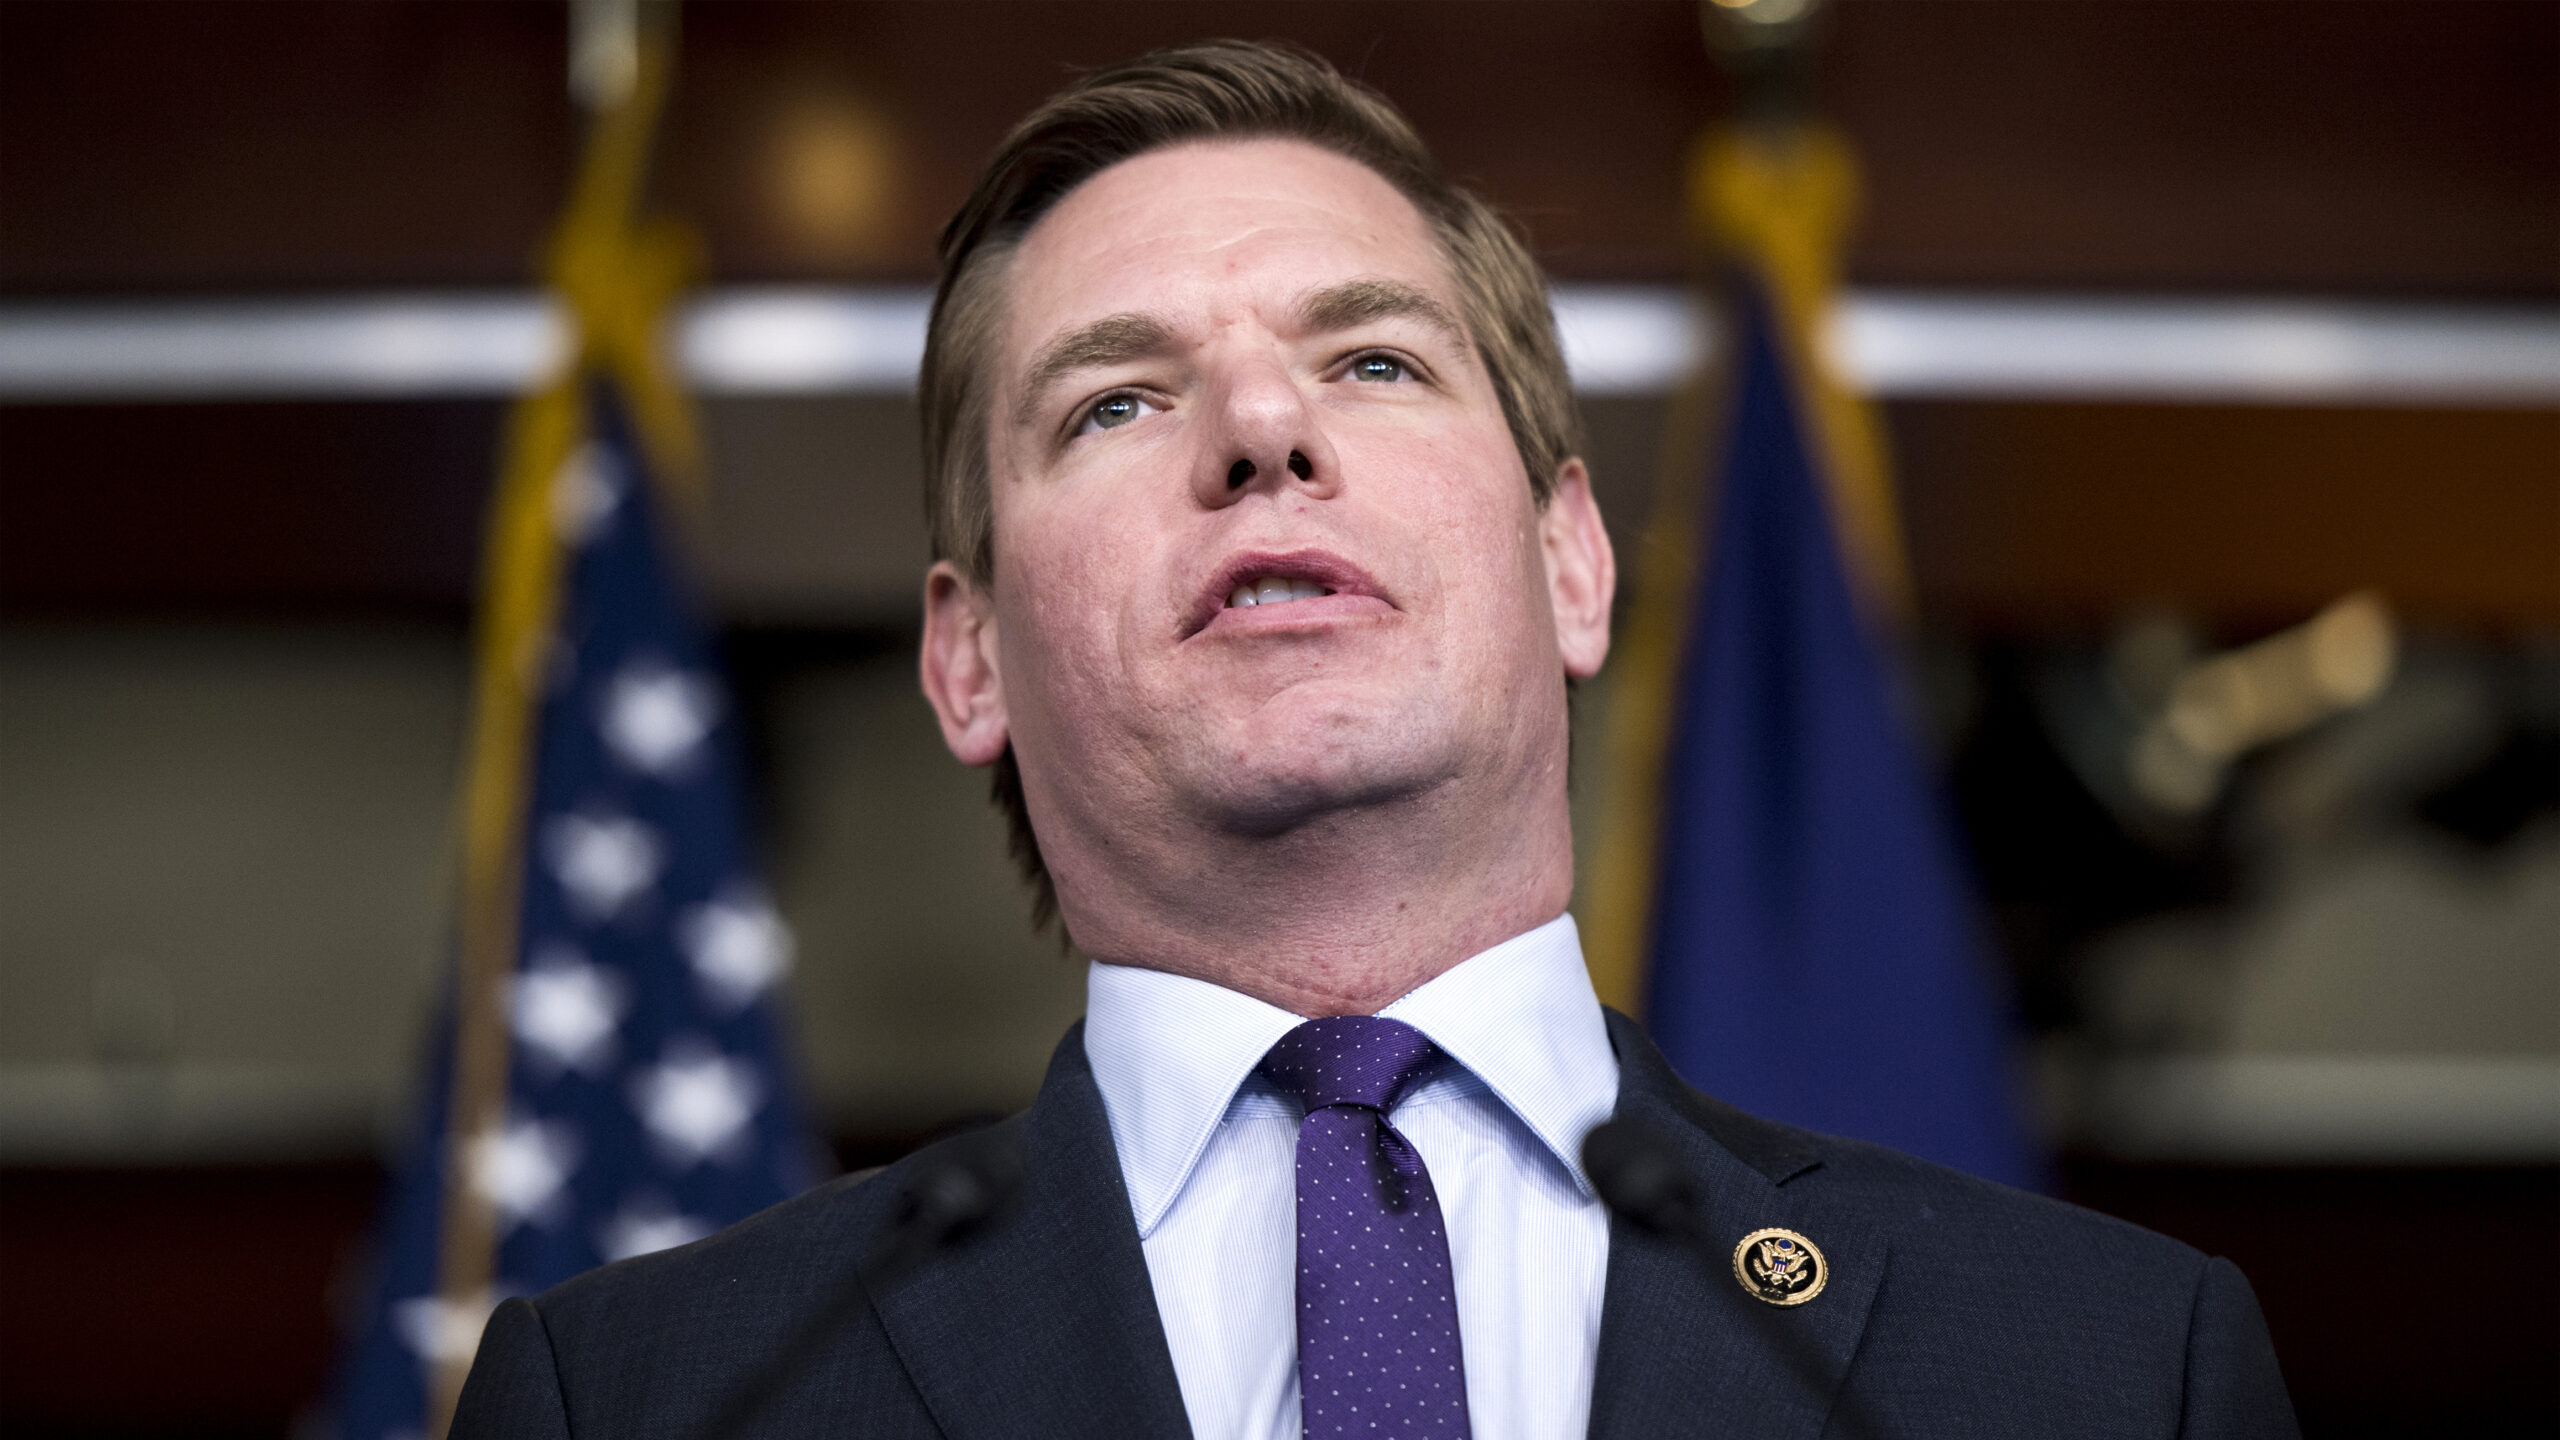 Ex-NFL player threatens Eric Swalwell with Guantanamo or execution.